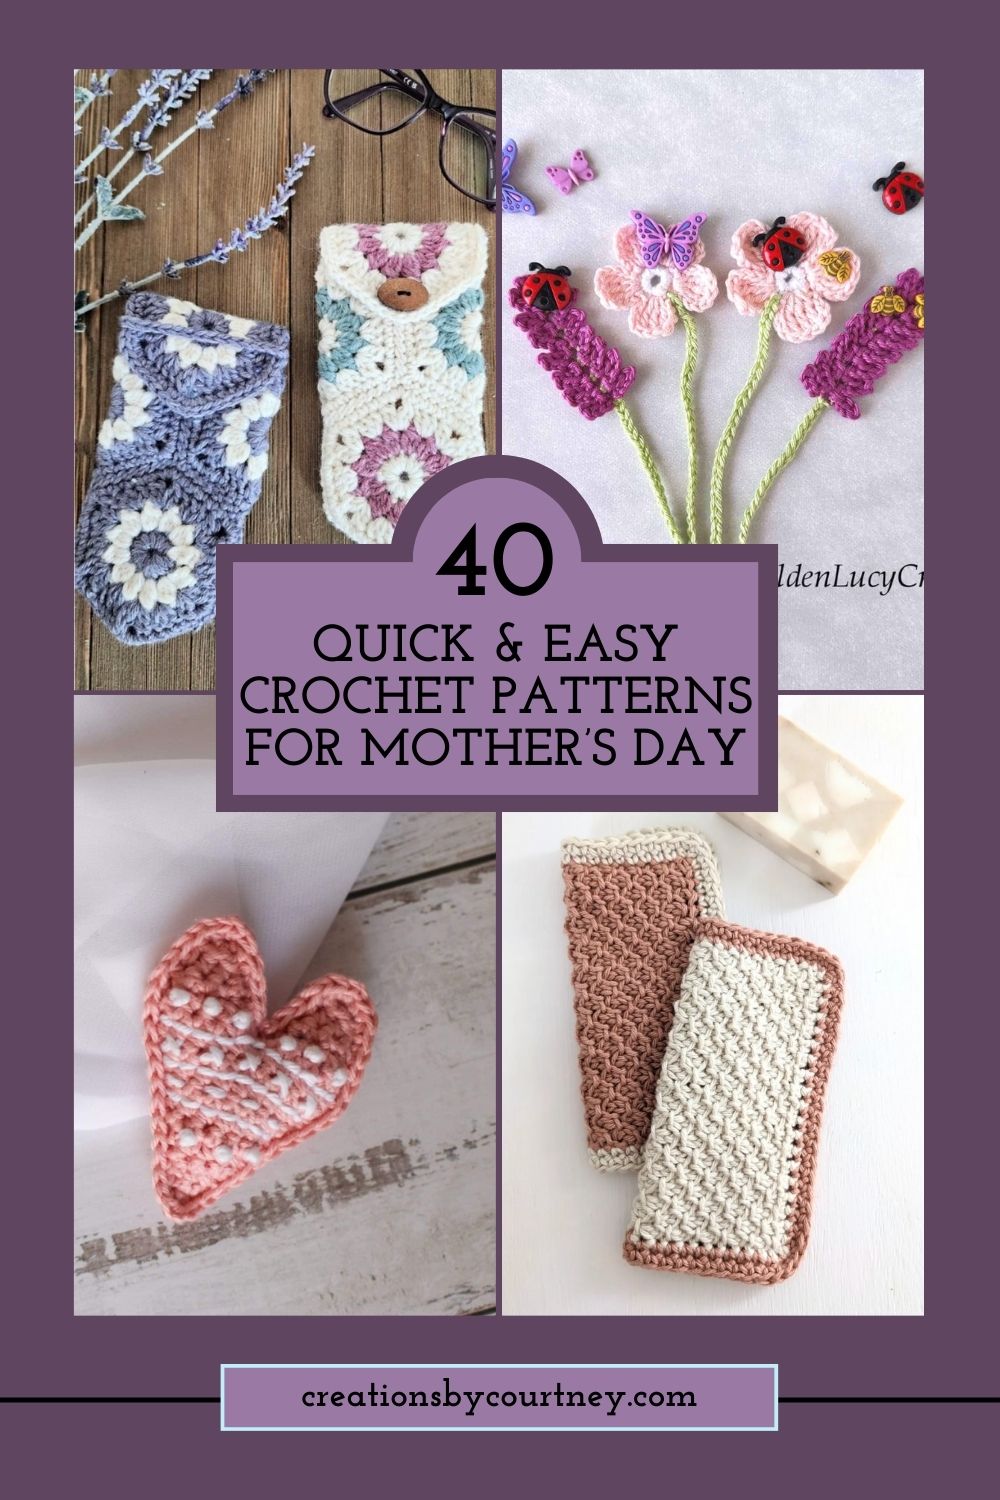 A 4 photo collage with title box in the middle, "40 Quick & Easy Crochet Patterns for Mother's Day." Upper left corner has an image of an eye glass case made from hexagon motifs. Upper Right corner shows flower bookmarks. Lower left shows an embroidered heart. Lower right corner shows tunisian honeycomb washcloths. 